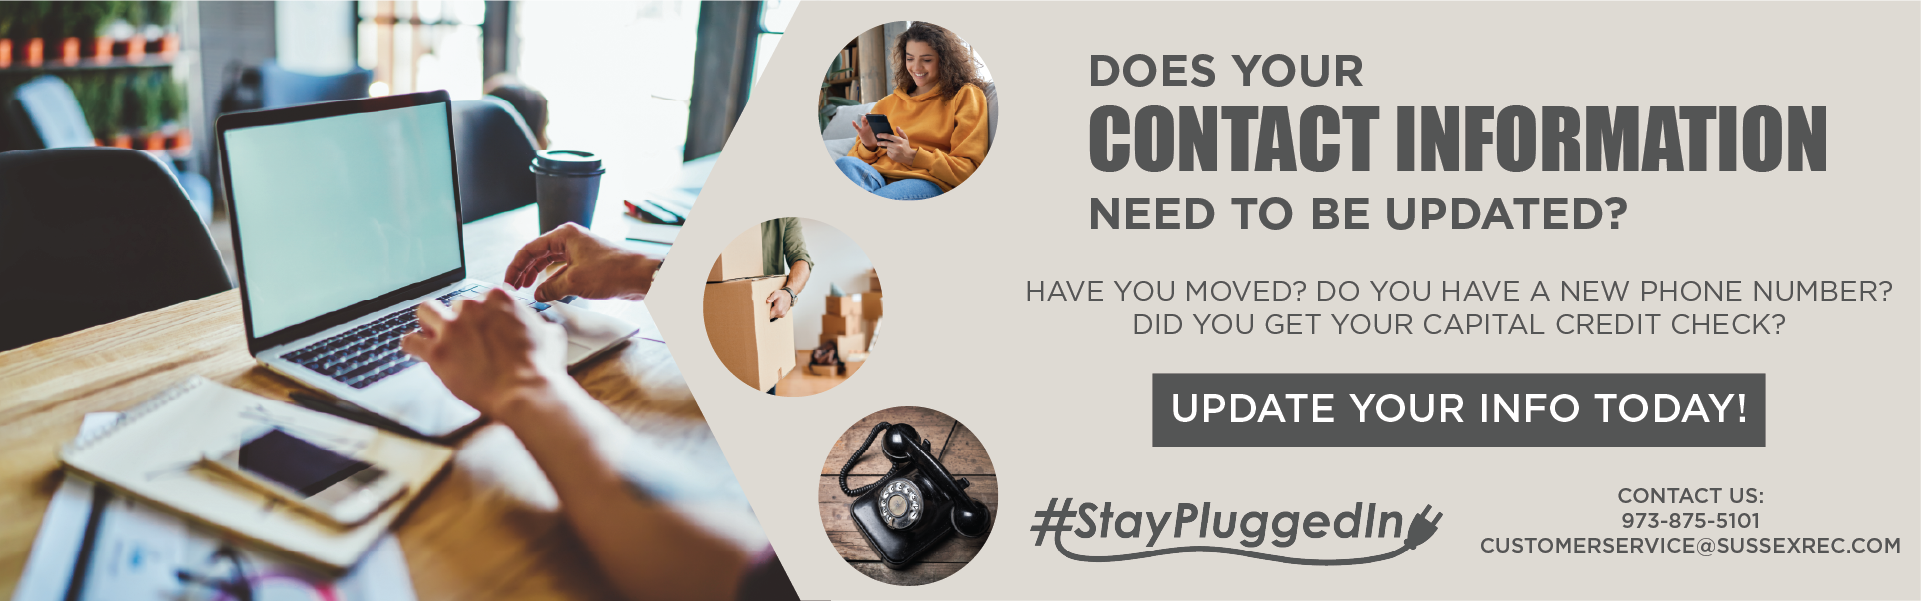 Does Your CONTACT INFORMATION Need To Be Updated? Have you moved? Do you have a new phone number? Did you get your capital credit check? UPDATE YOUR INFO TODAY! #StayPluggedIn. Contact Us: 973-875-5101, customerservice@sussexrec.com